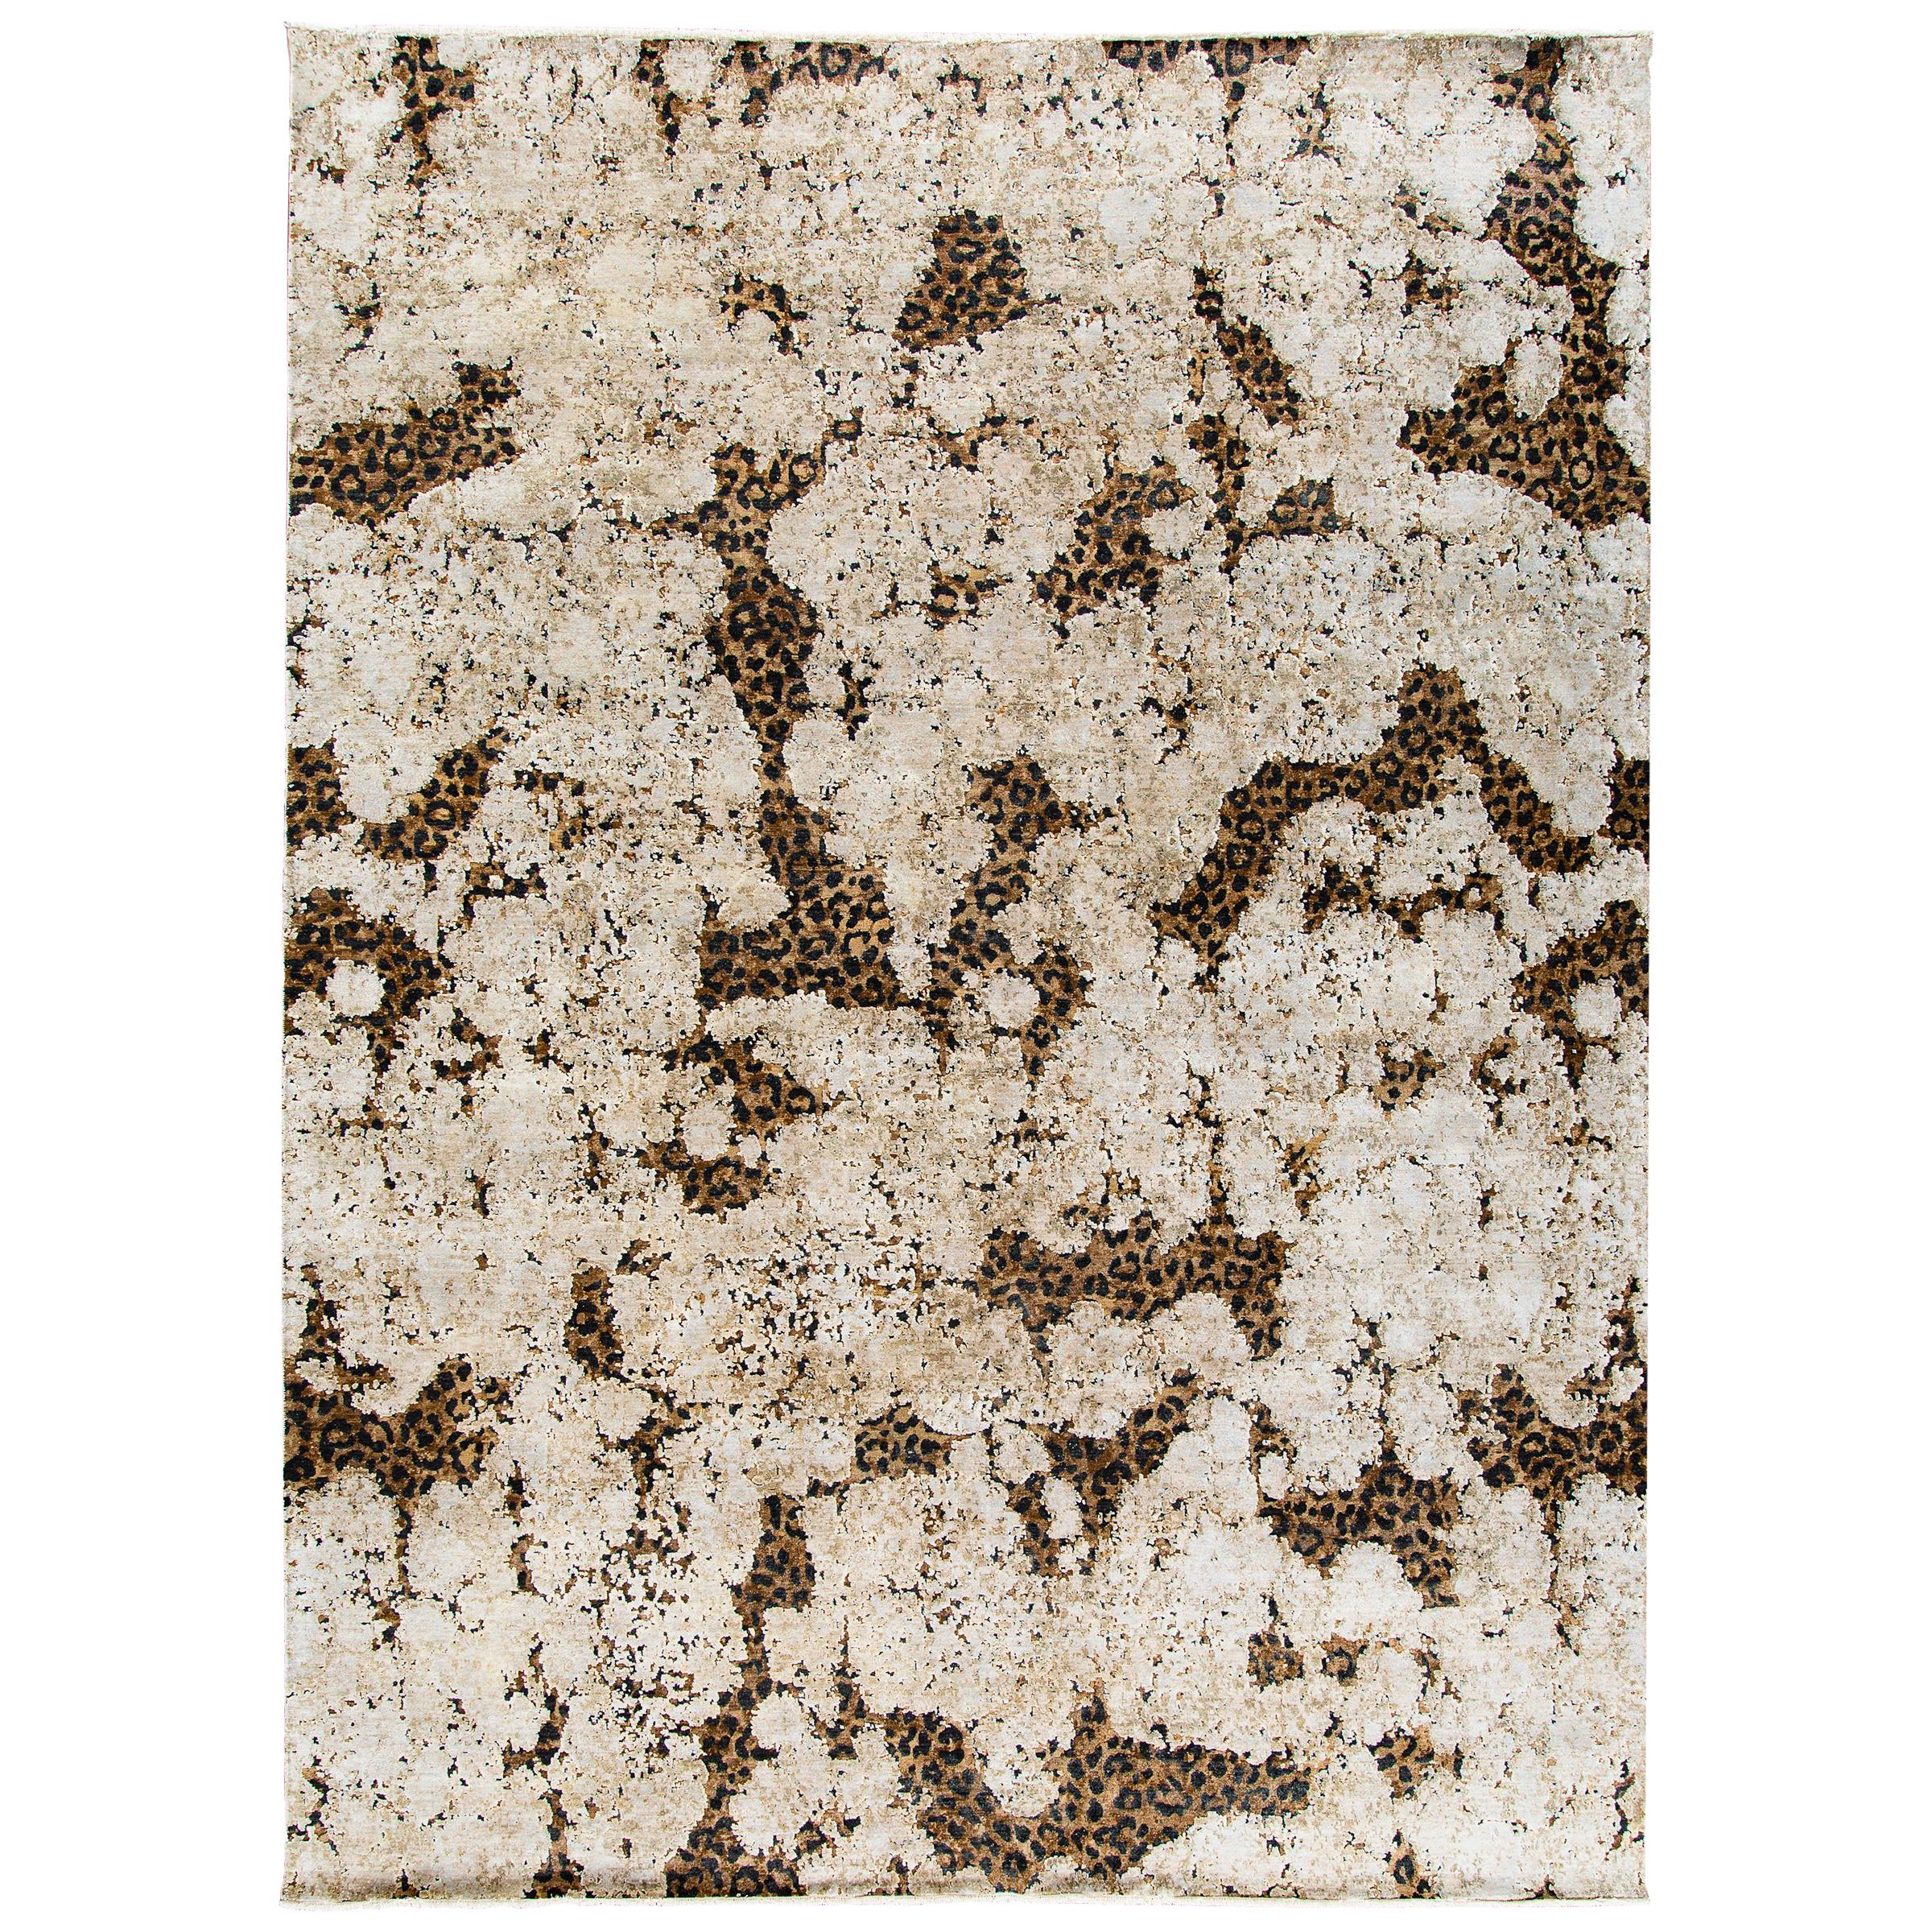 Contemporary Leopard Wool and Silk Hand-Knotted Rug in Brown, Creme and Black